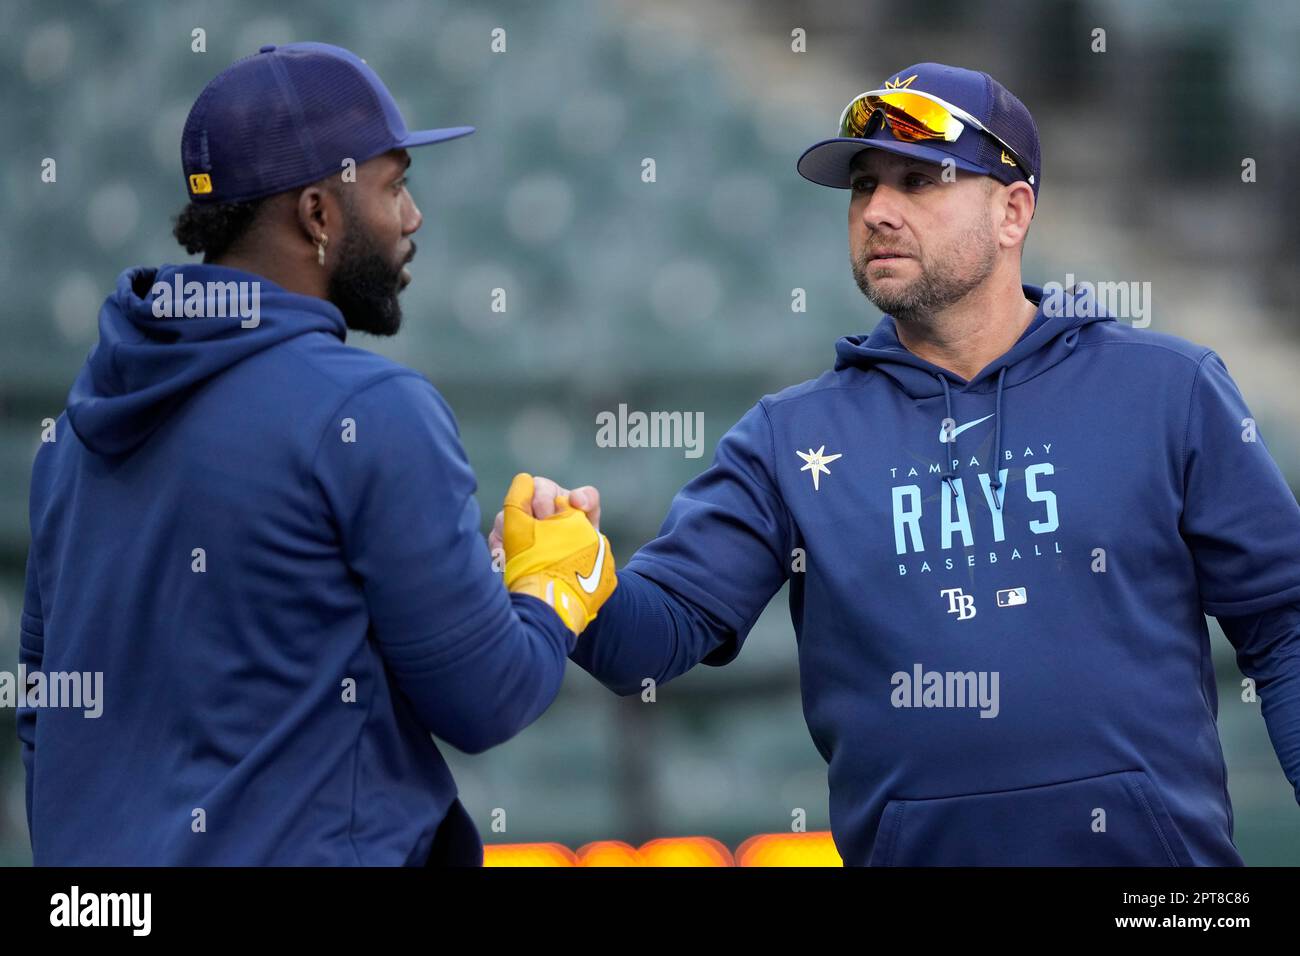 Tampa Bay Rays assistant hitting coach Dan DeMent, right, shakes